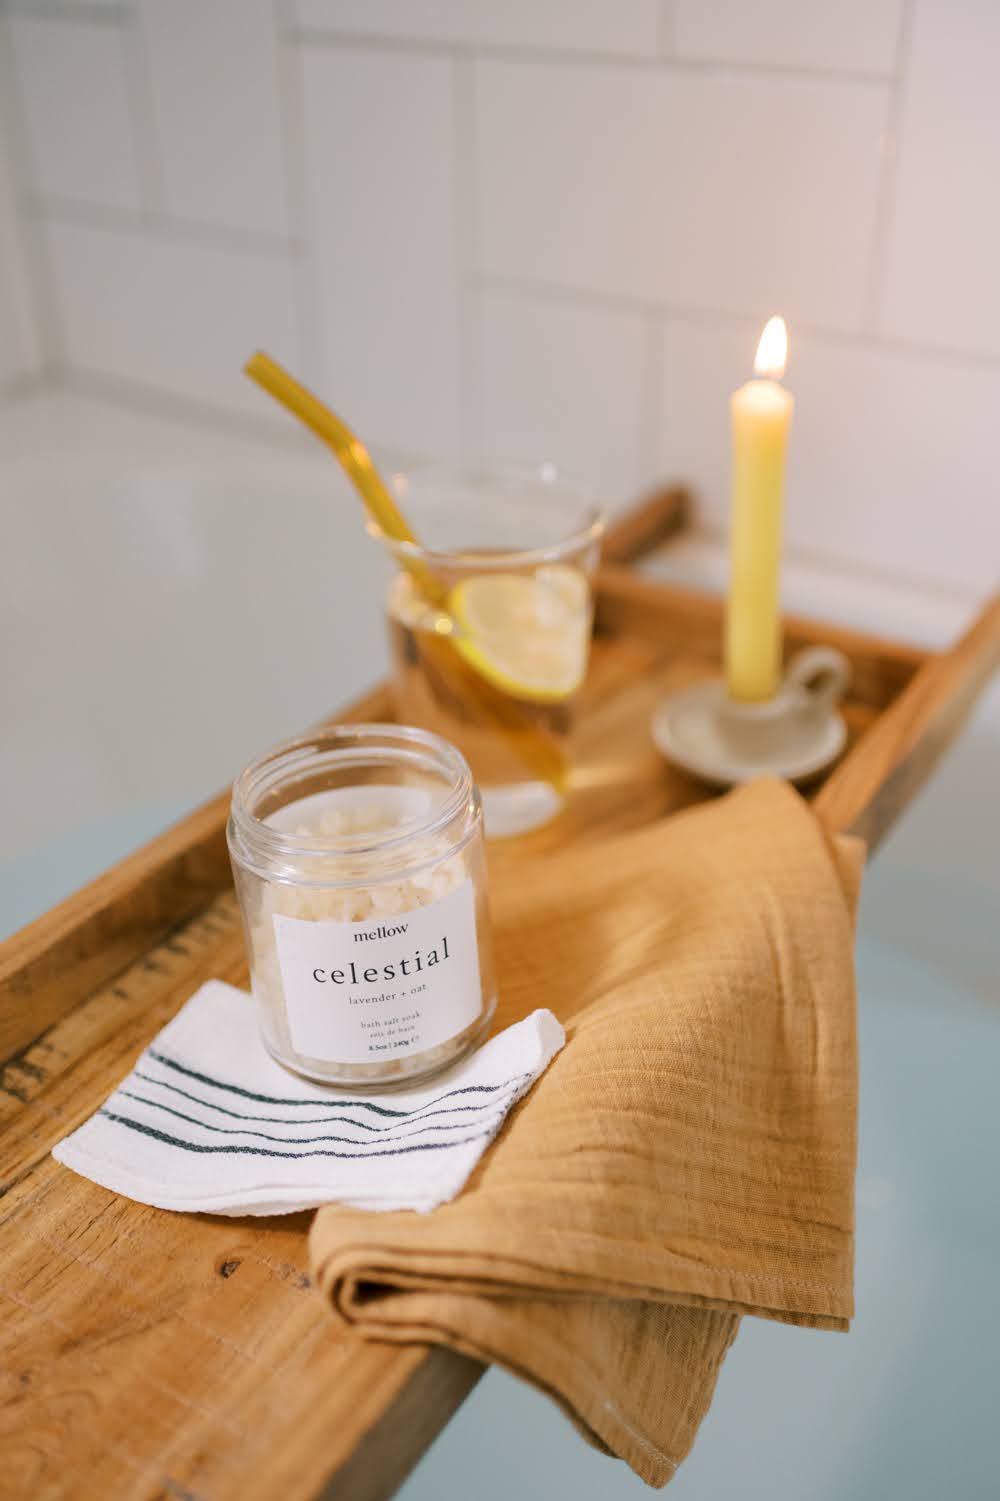 Bath caddy with bath soak, exfoliating mitt, hand towel, glass of water with glass straw and a lit beeswax candle.